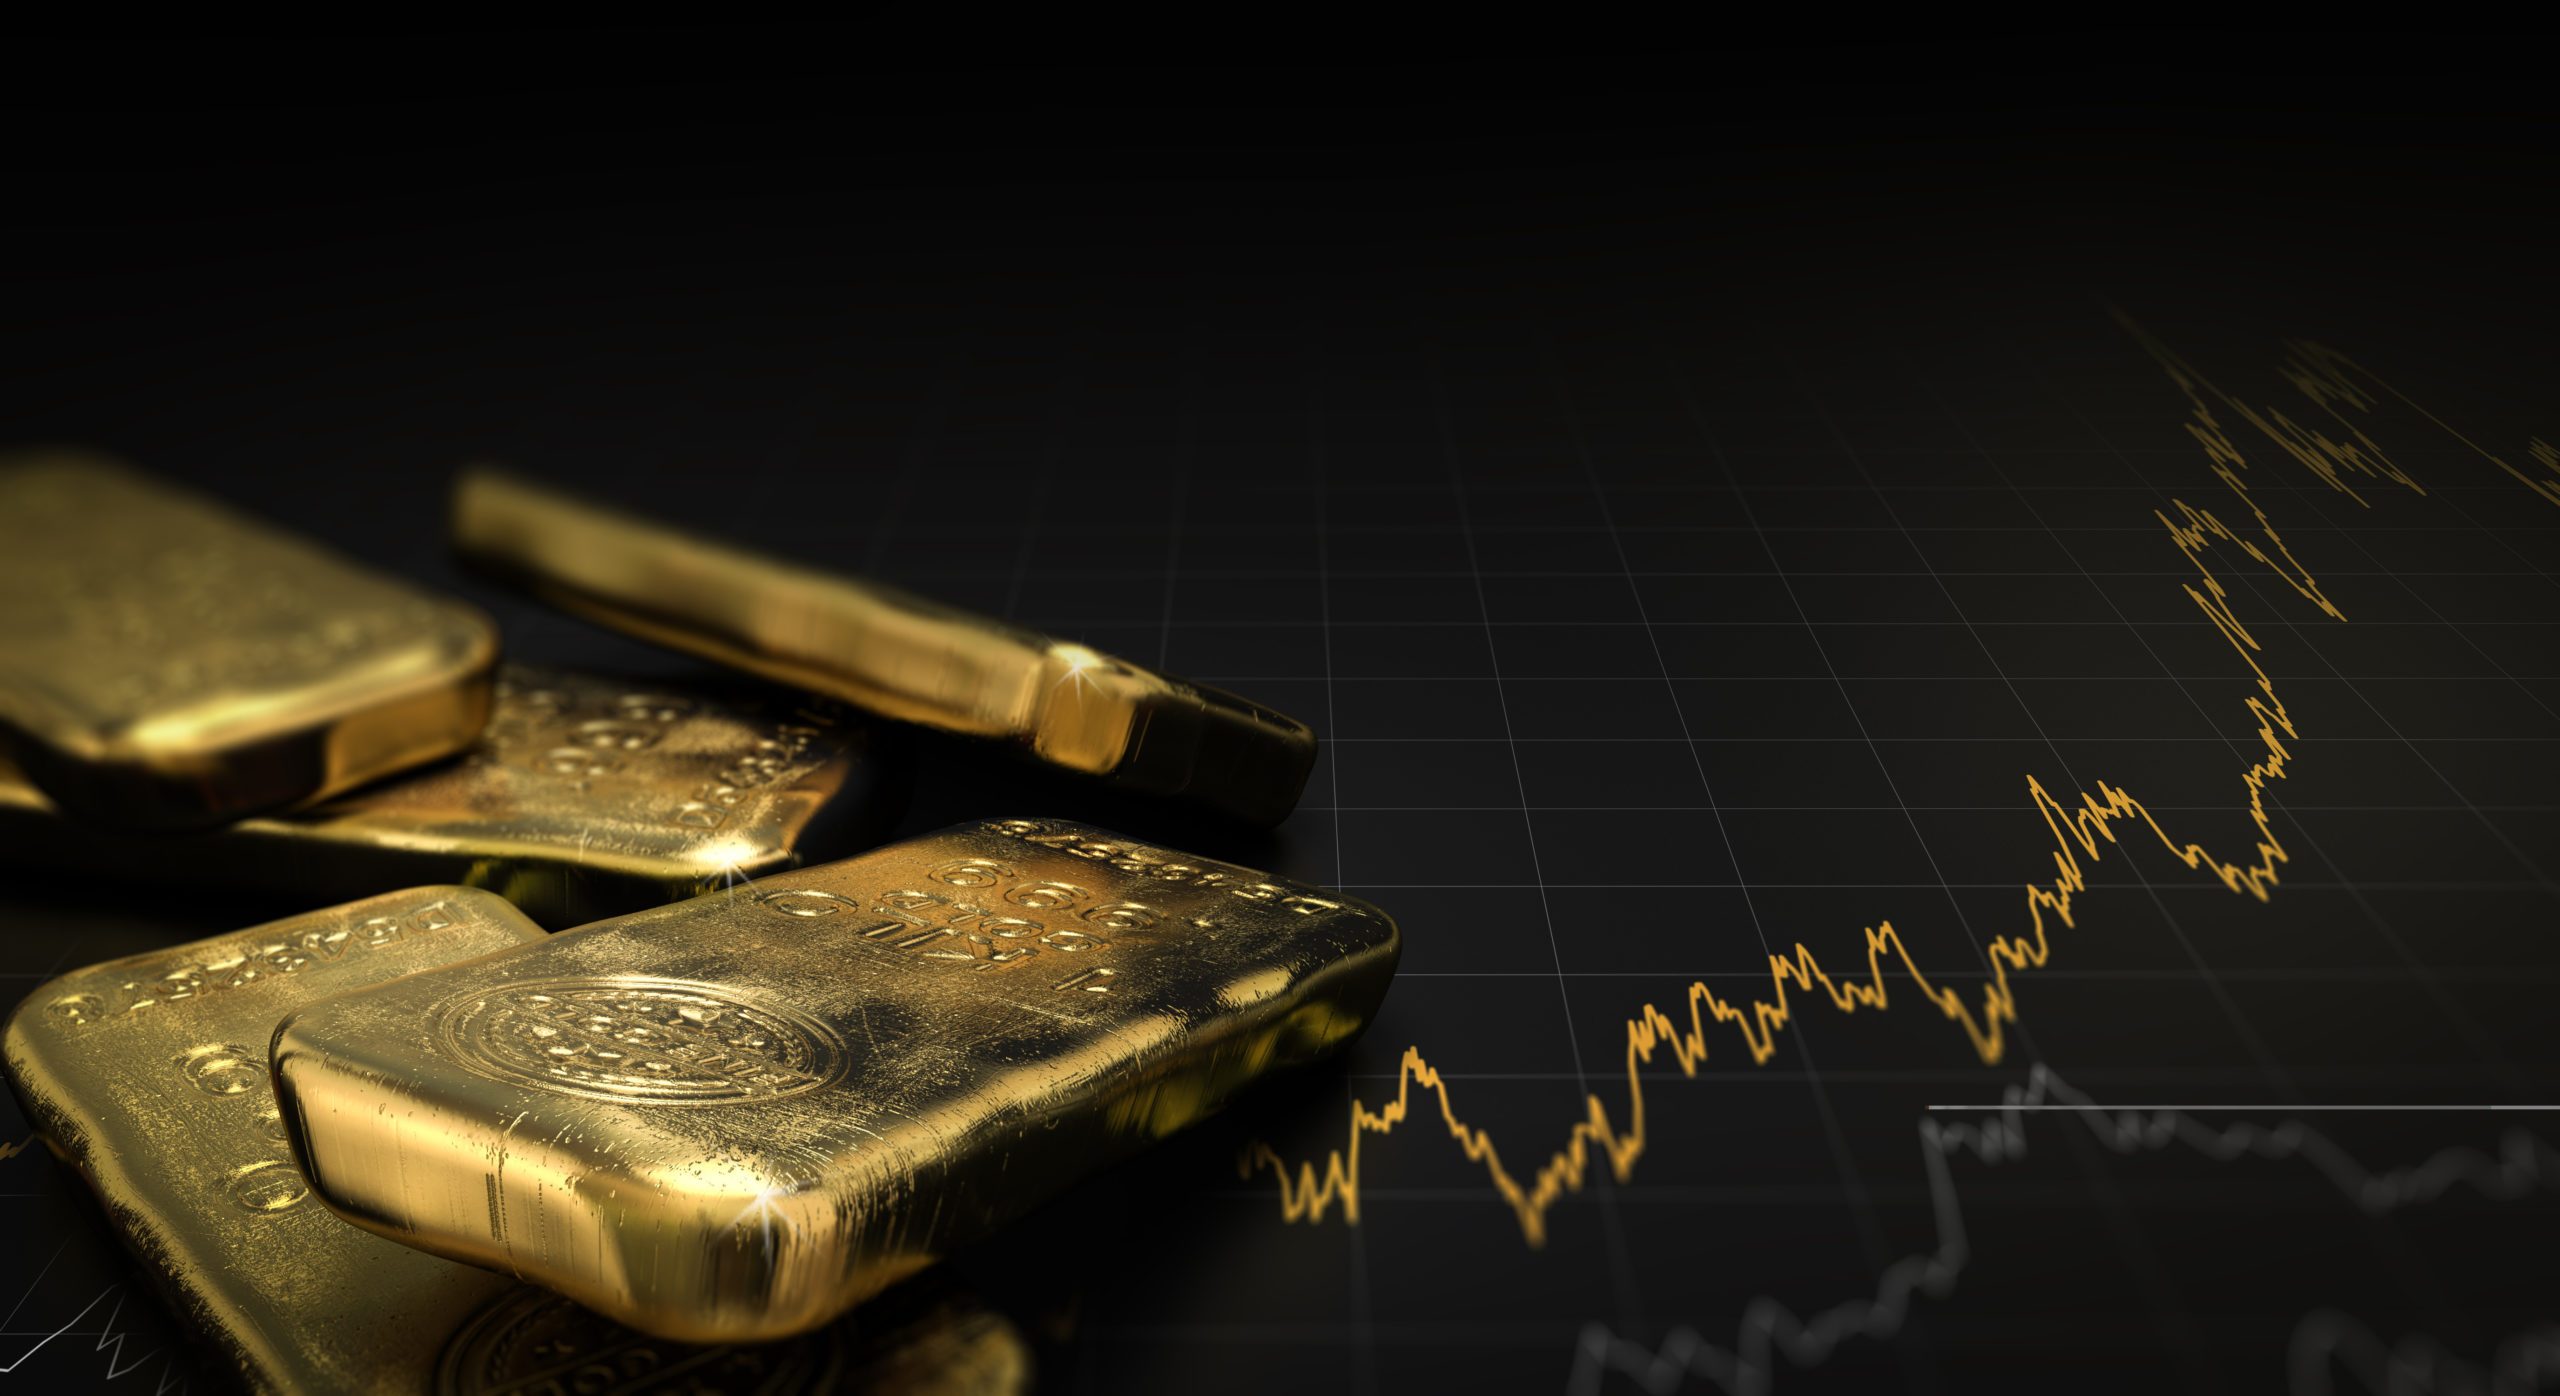 If you regularly sell gold, you undoubtedly keep an eye on the gold price. But what gold price factors go into the sometimes unpredictable price?